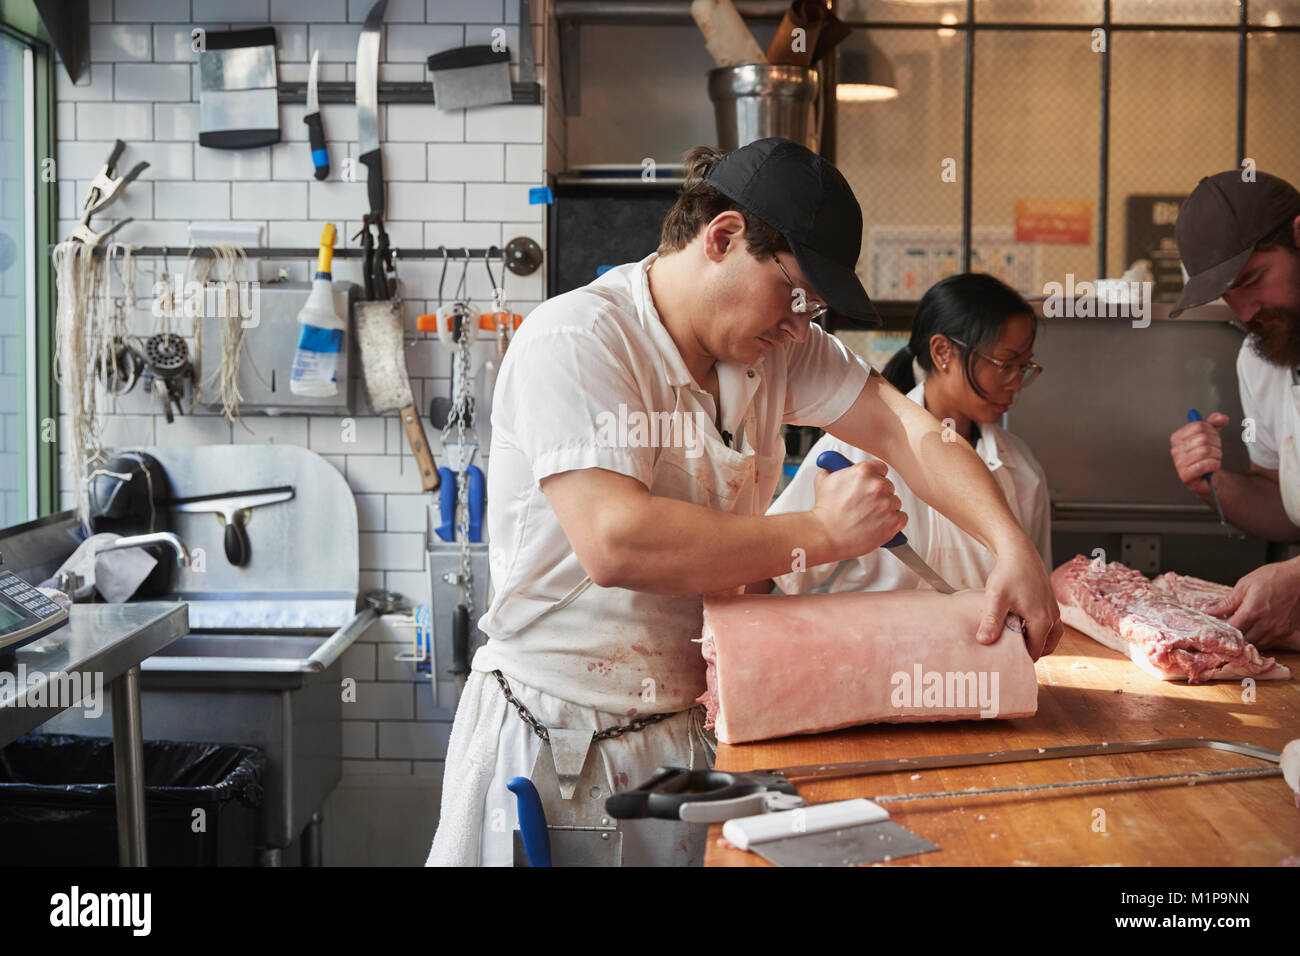 Three butchers preparing meat,cuts of meat at a butcher's shop Stock Photo